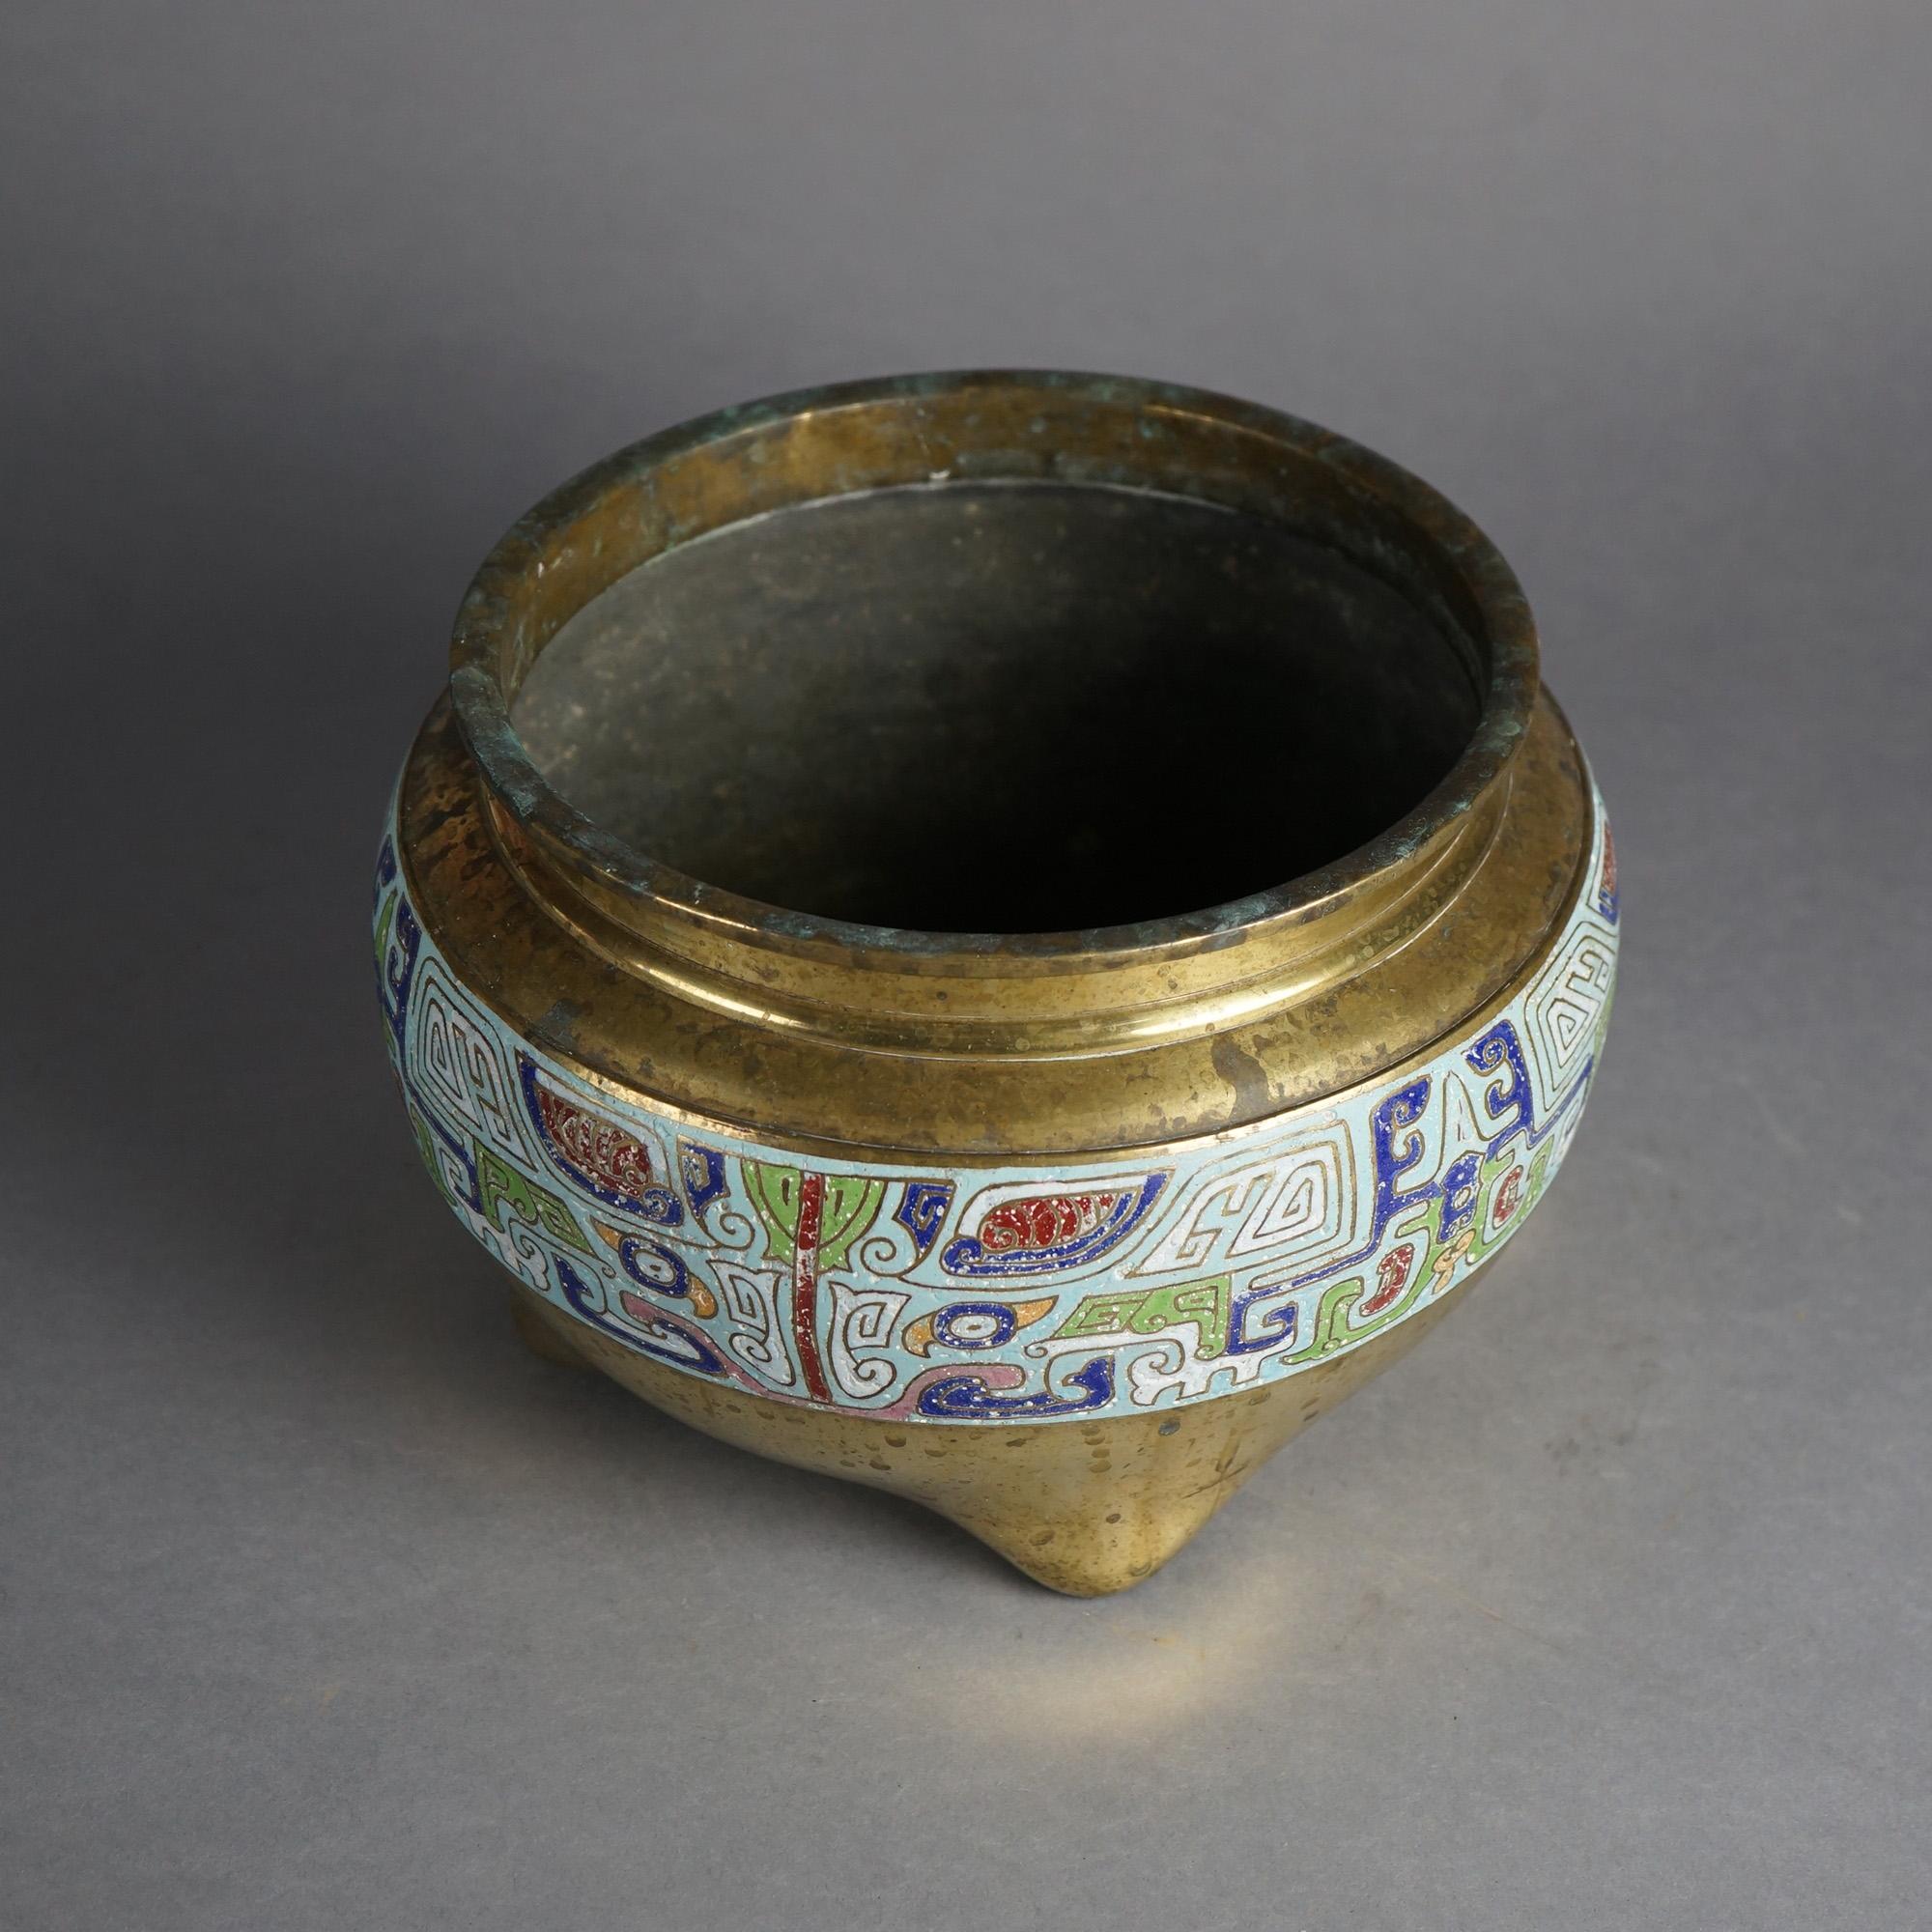 Asian Bronze Footed Jardiniere with Enameled Band with Egyptian Symbols 20thC

Measures- 7.25''H x 10.75''W x 10.75''D